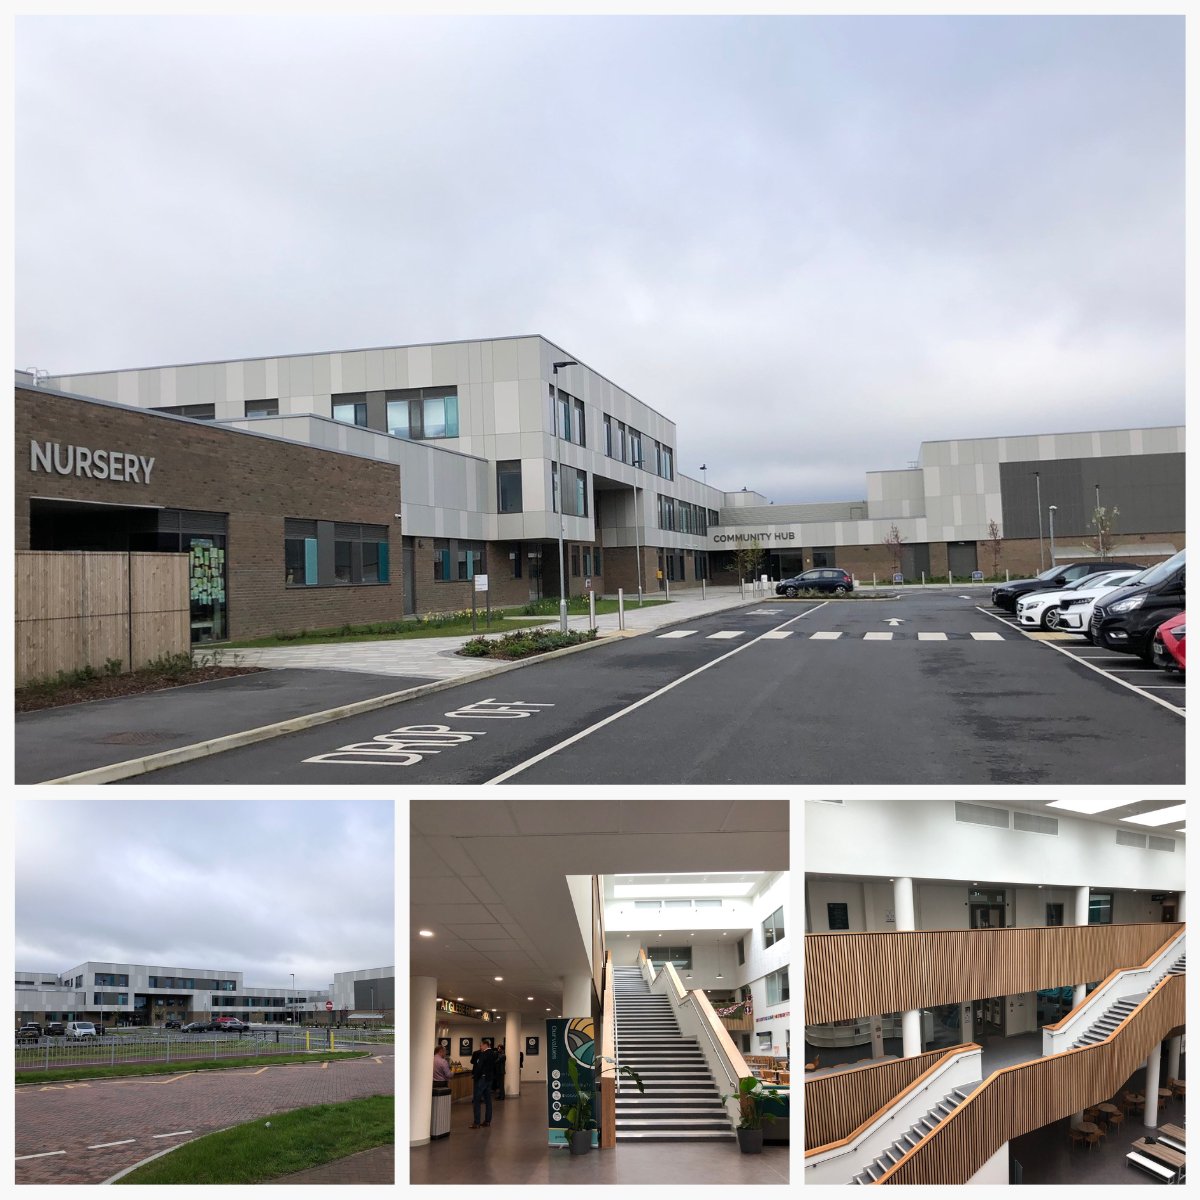 Great visit to Glebe Farm School - Milton Keynes’ first fossil fuel-free ‘all-through’ School and hear from the team @morgansindallc @curriebrown @mkcouncil @synergy_arch @aecom #community #miltonkeynes #education #futuregenerations #design #construct #innovate #sustainable